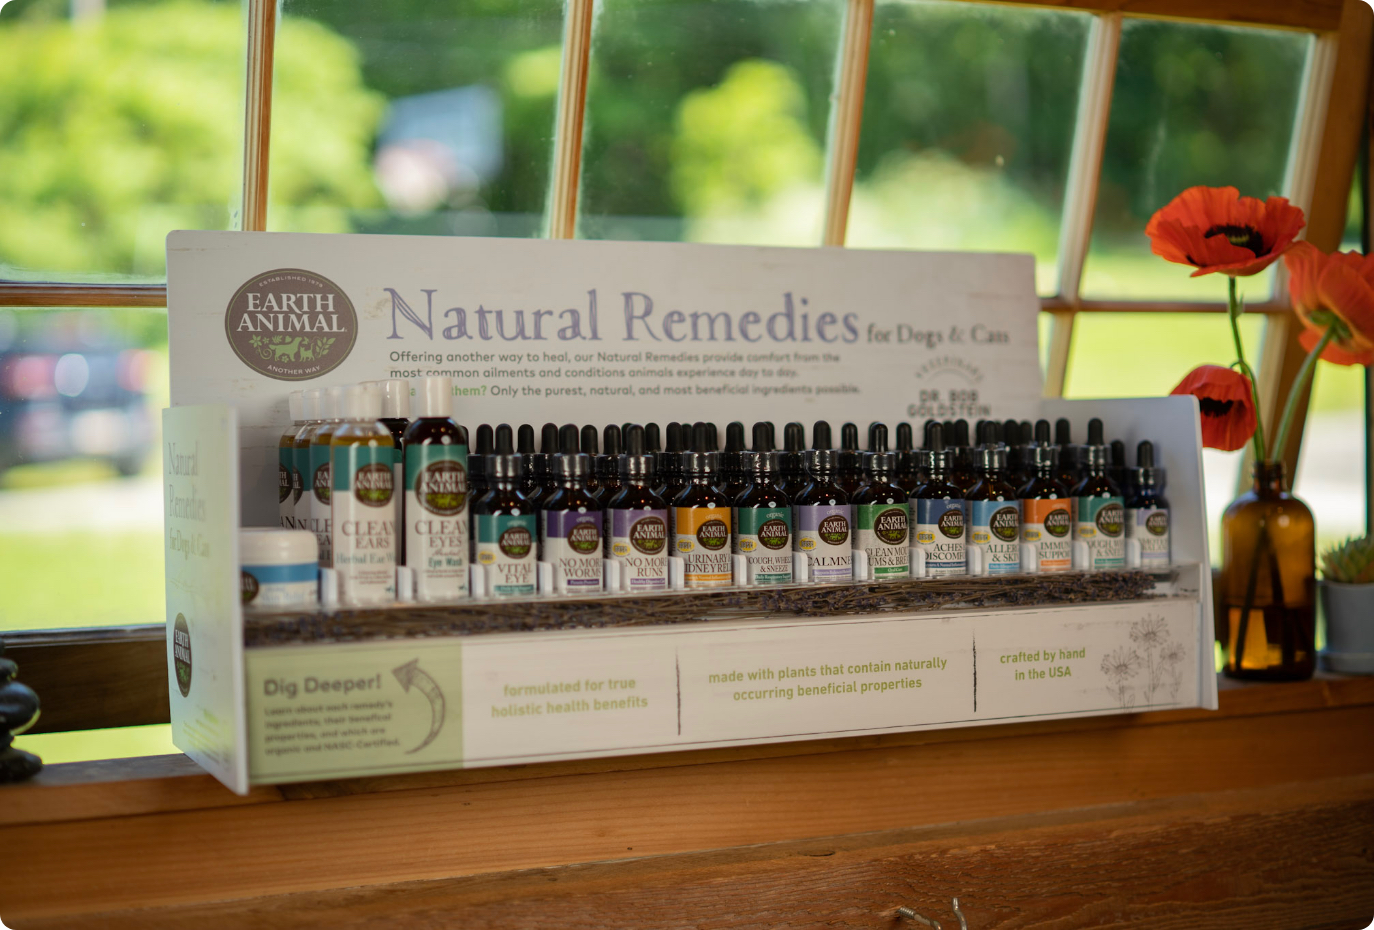 Natural remedies photo of products